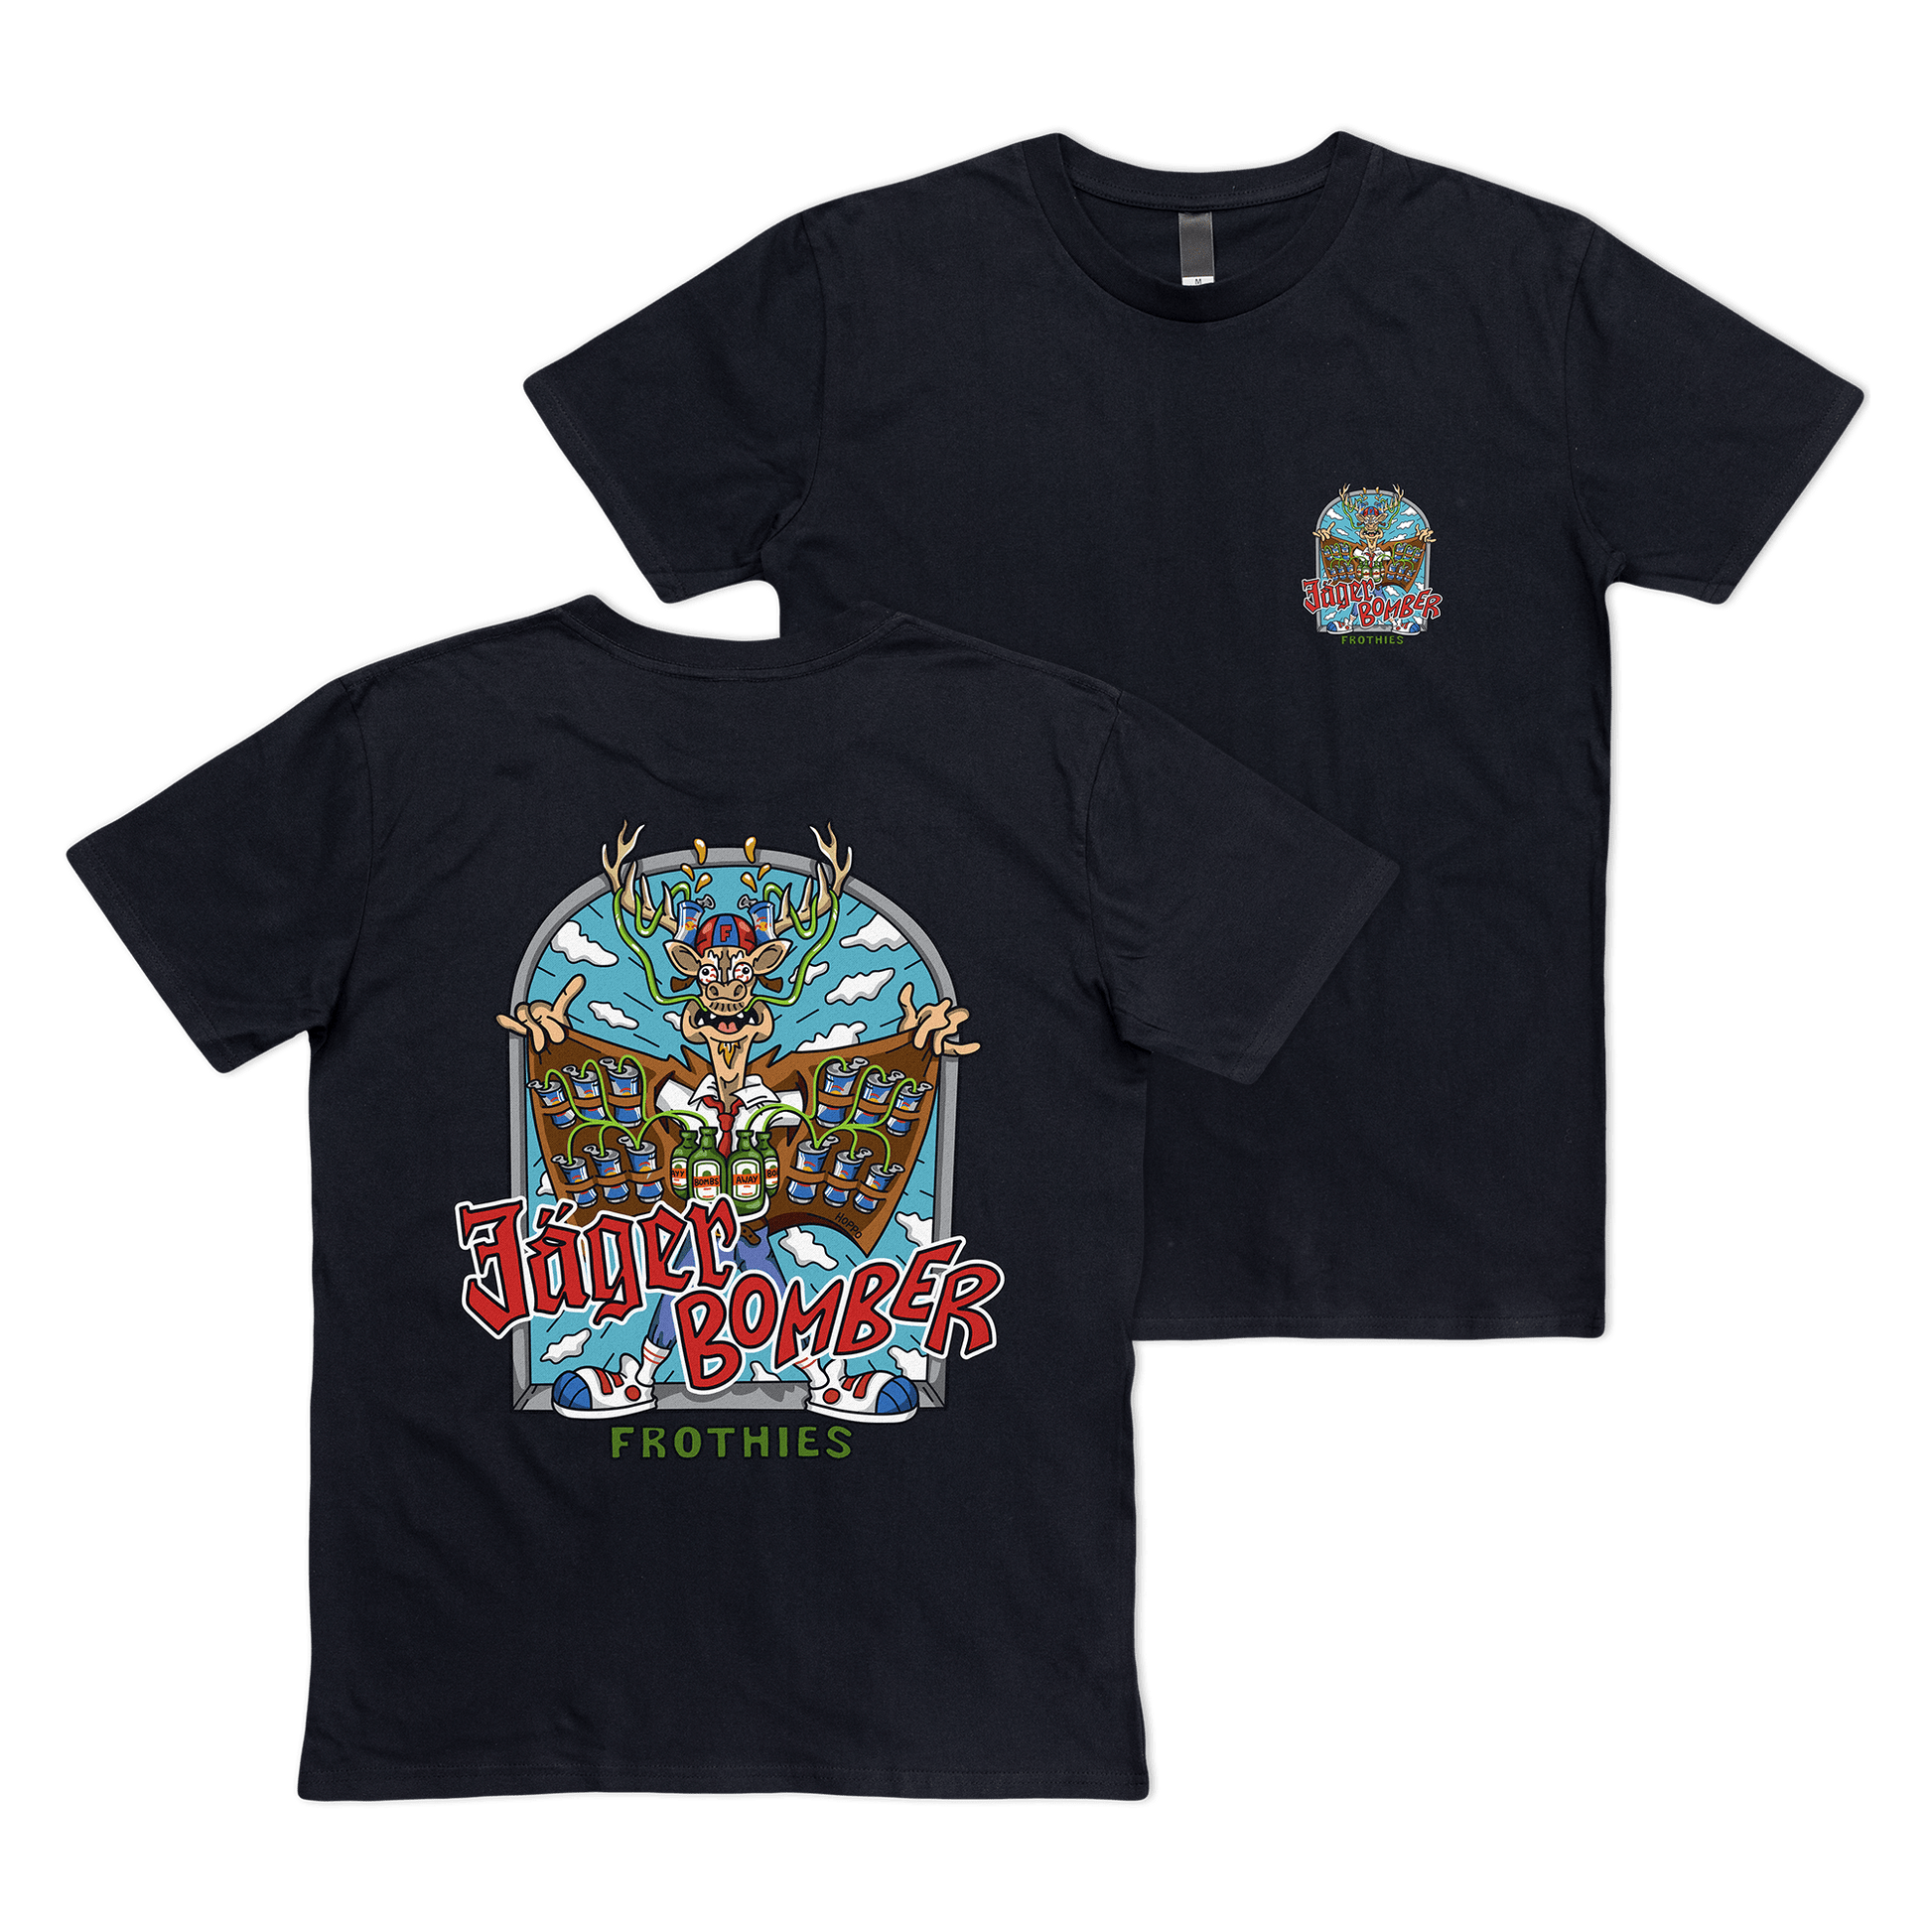 Jager Bomber Shirt T-Shirt Frothies